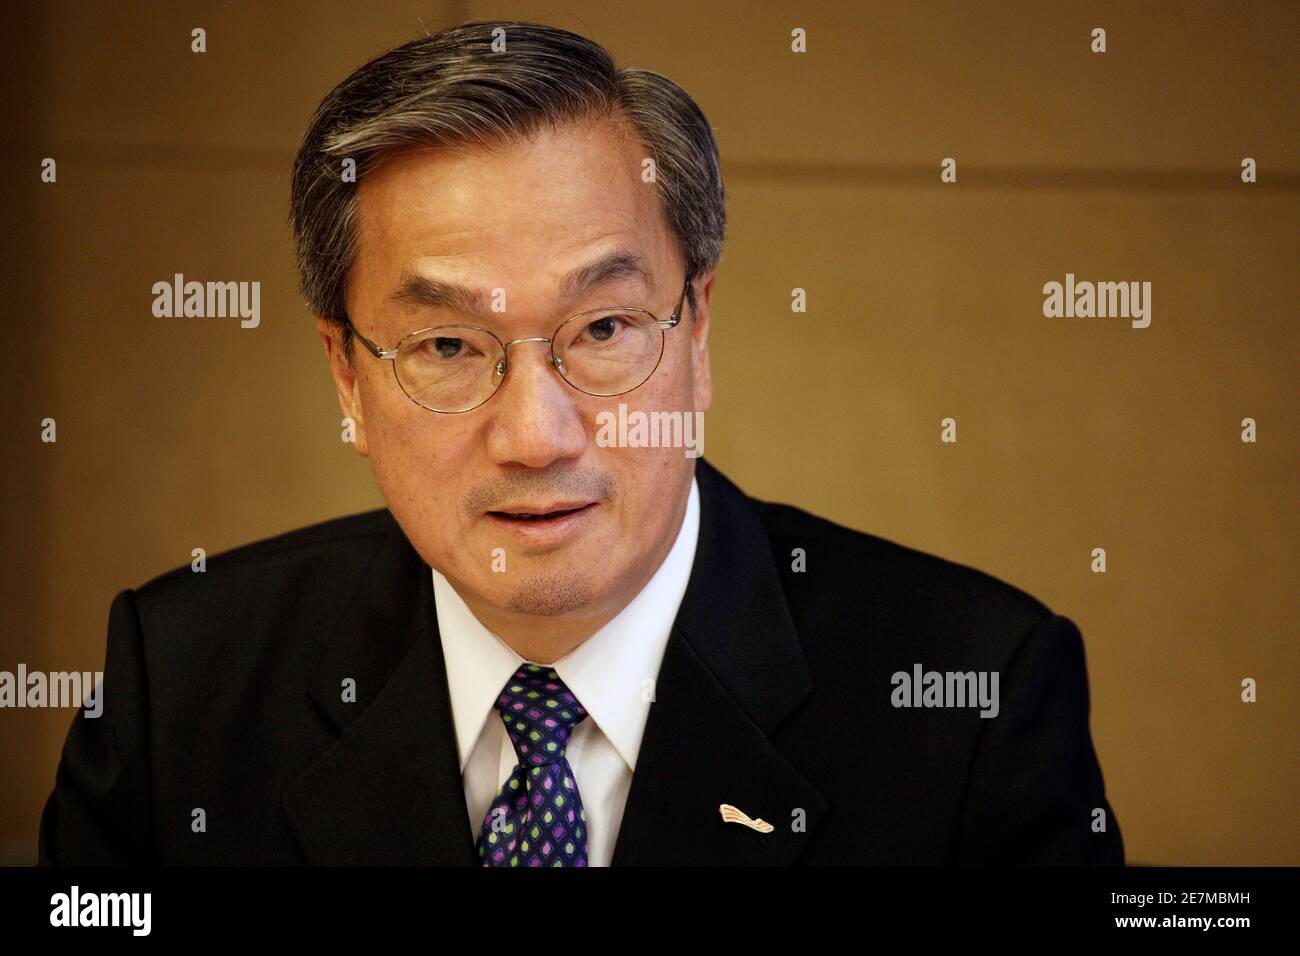 New World Development Holdings Executive director Tsang Yam Pui speaks during the Reuters China Investment Summit in Hong Kong September 2, 2009.    REUTERS/Tyrone Siu    (CHINA POLITICS BUSINESS) Stock Photo